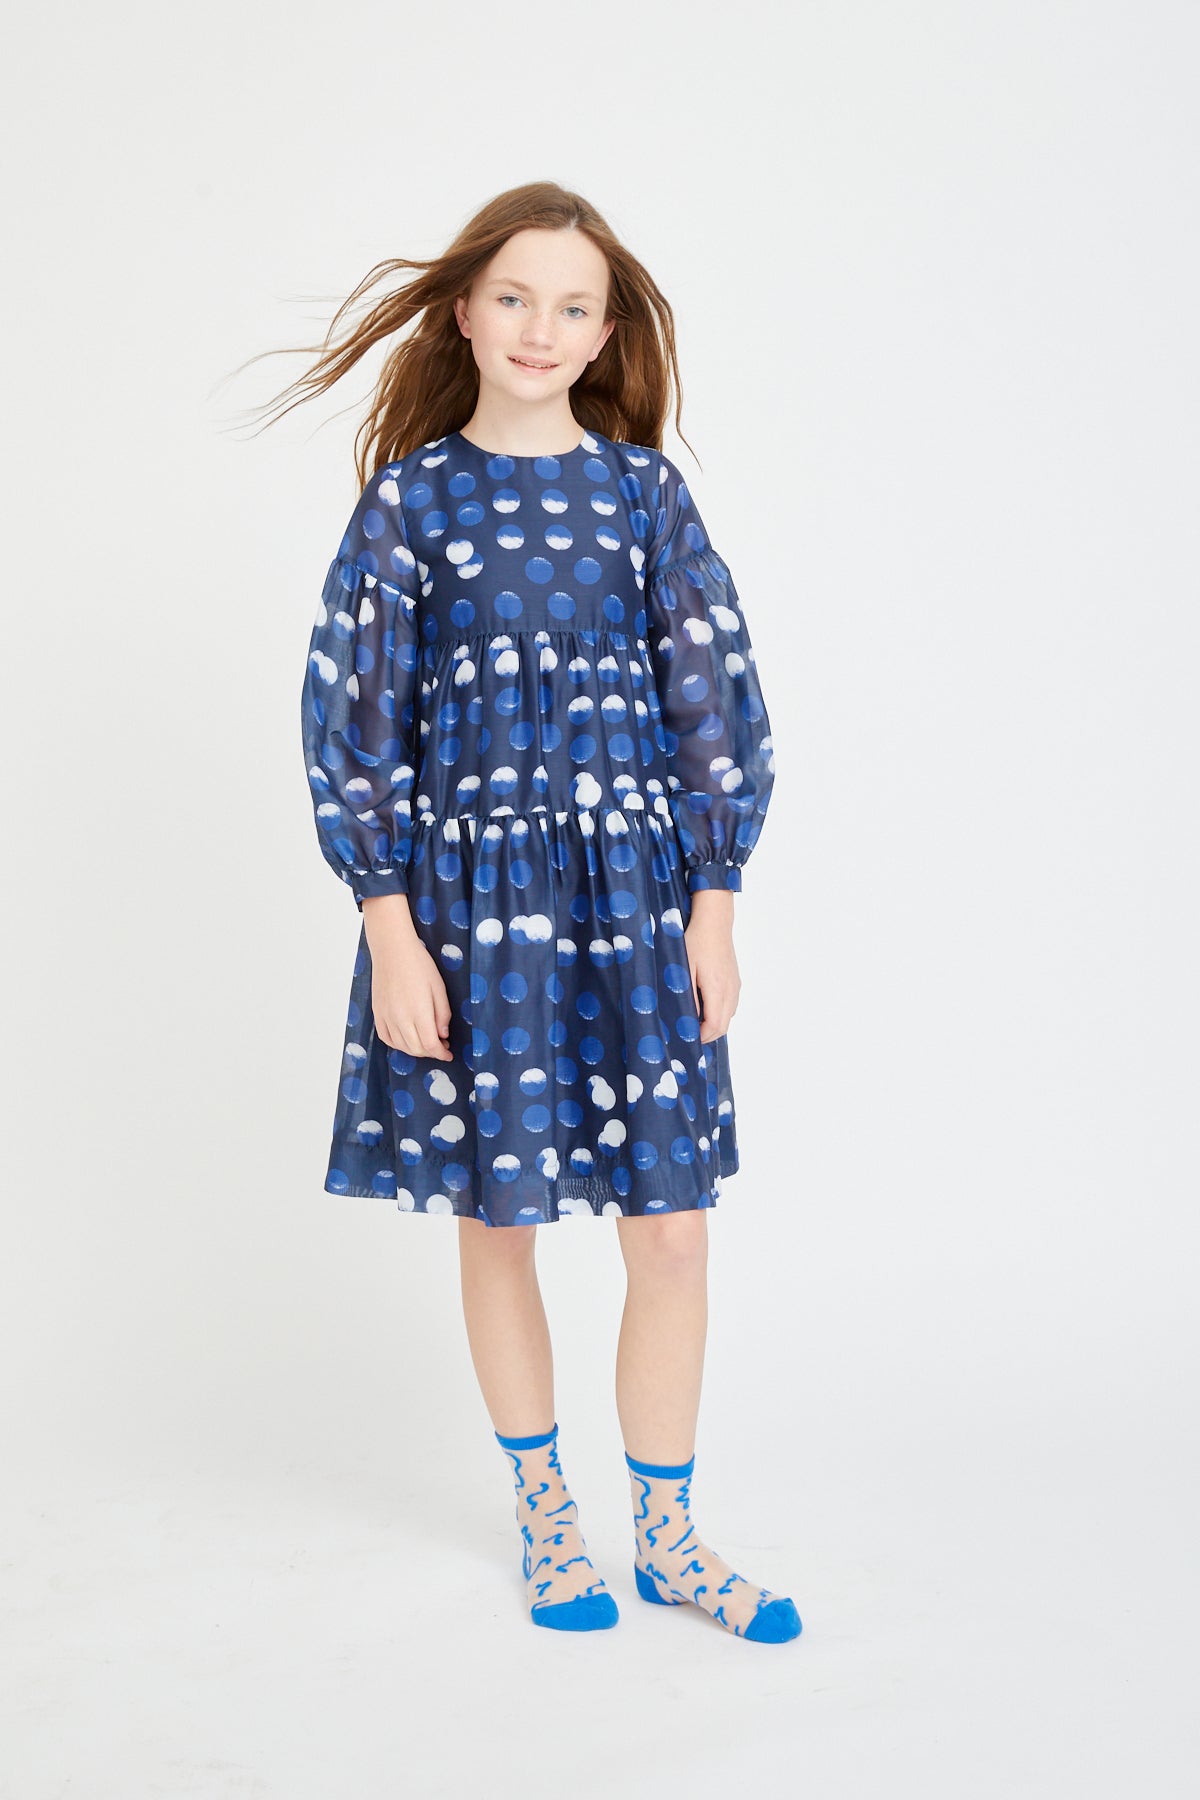 Navy With Blue White Circle Dress